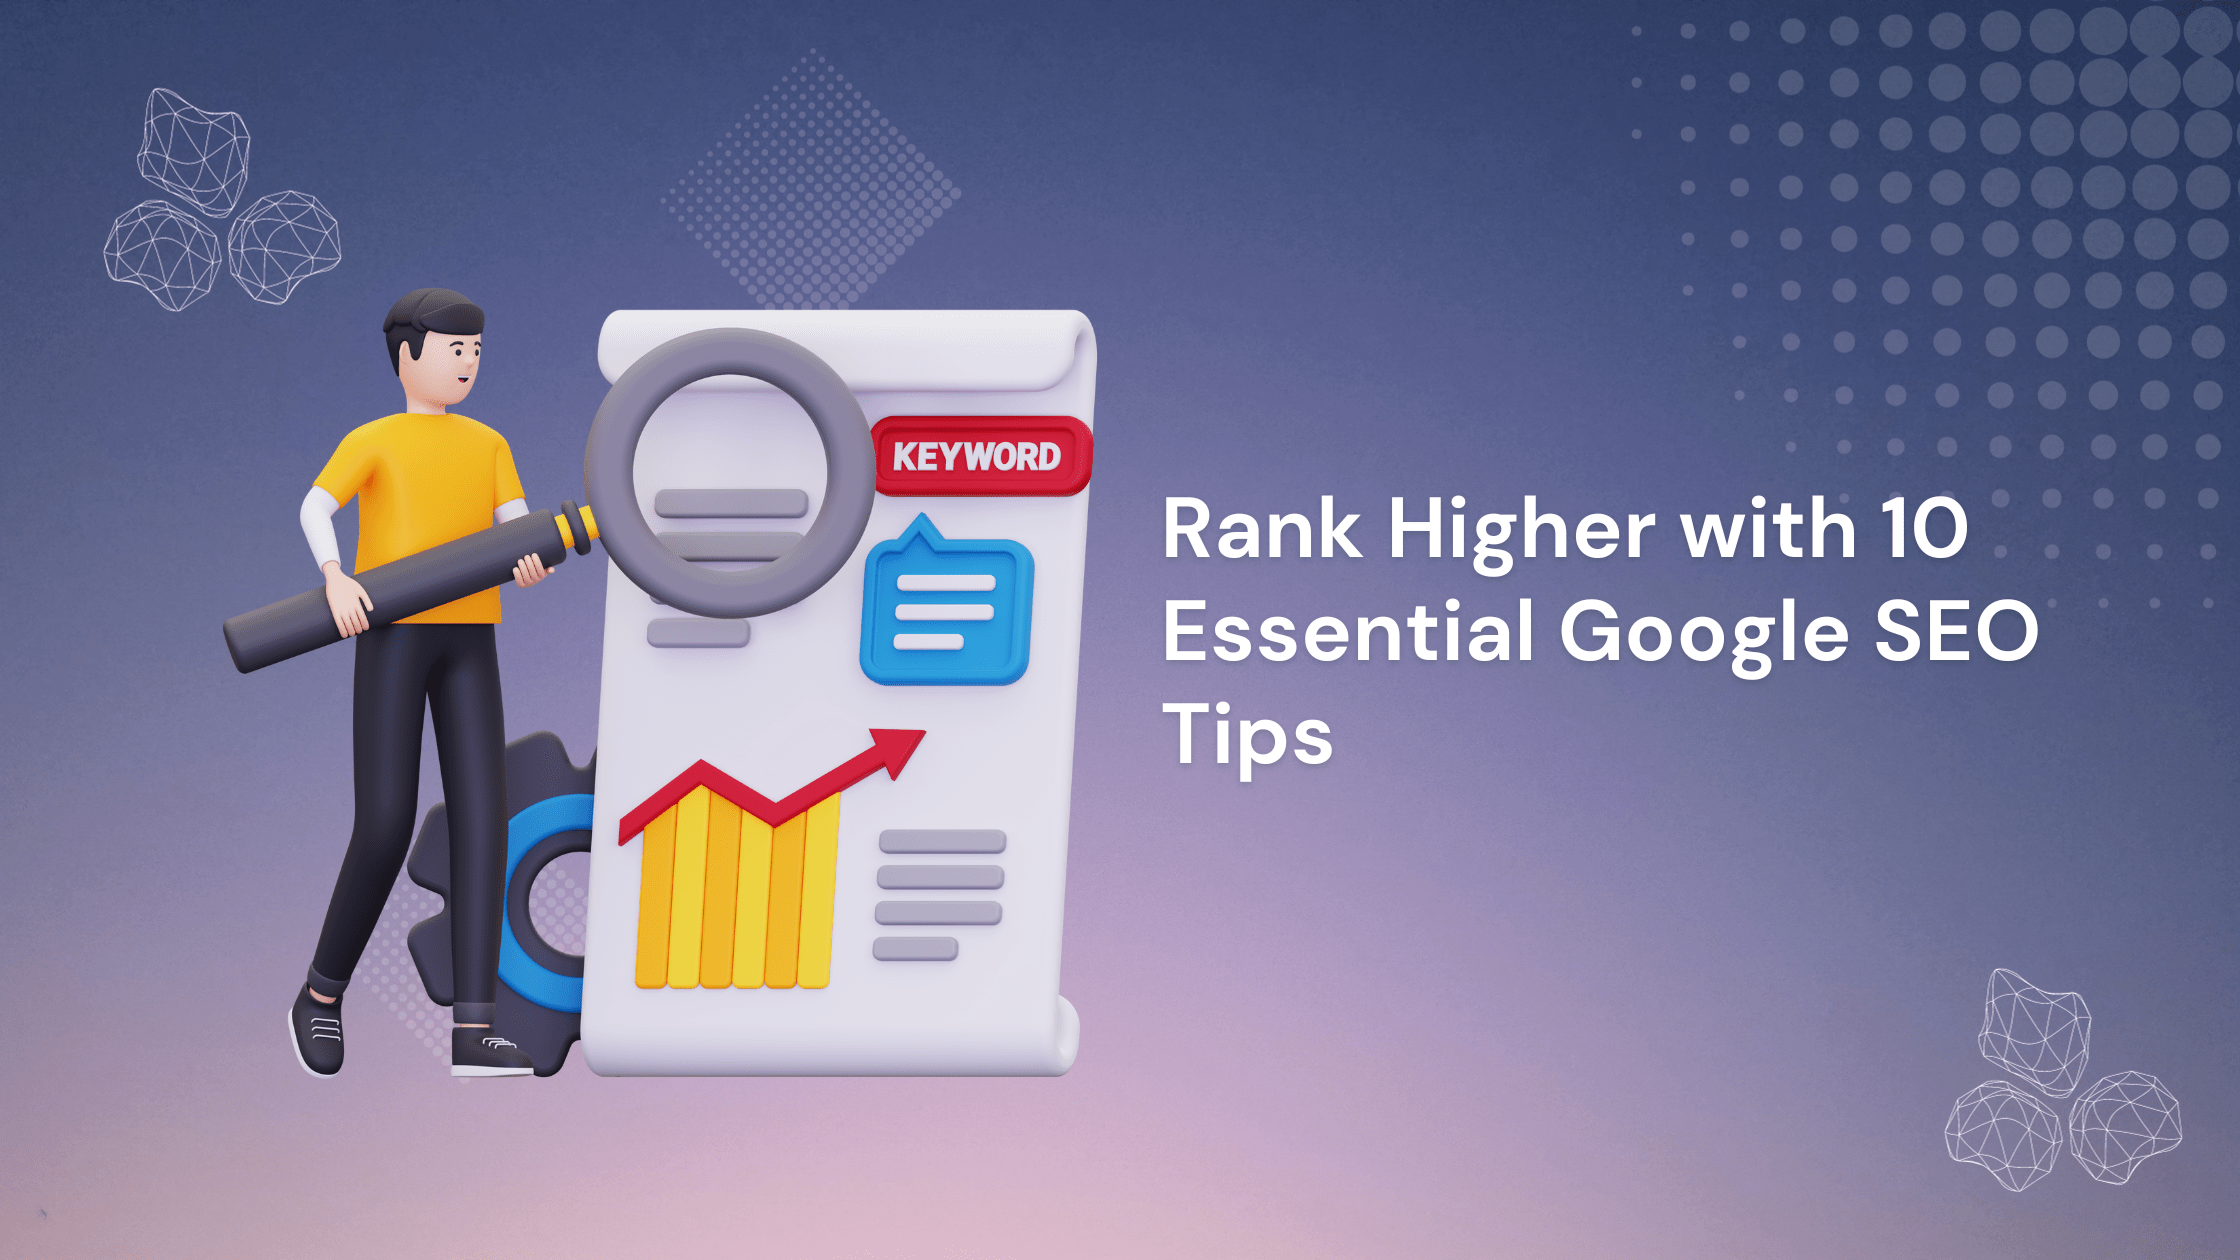 Website's Ranking with 10 Essential Google SEO Tips